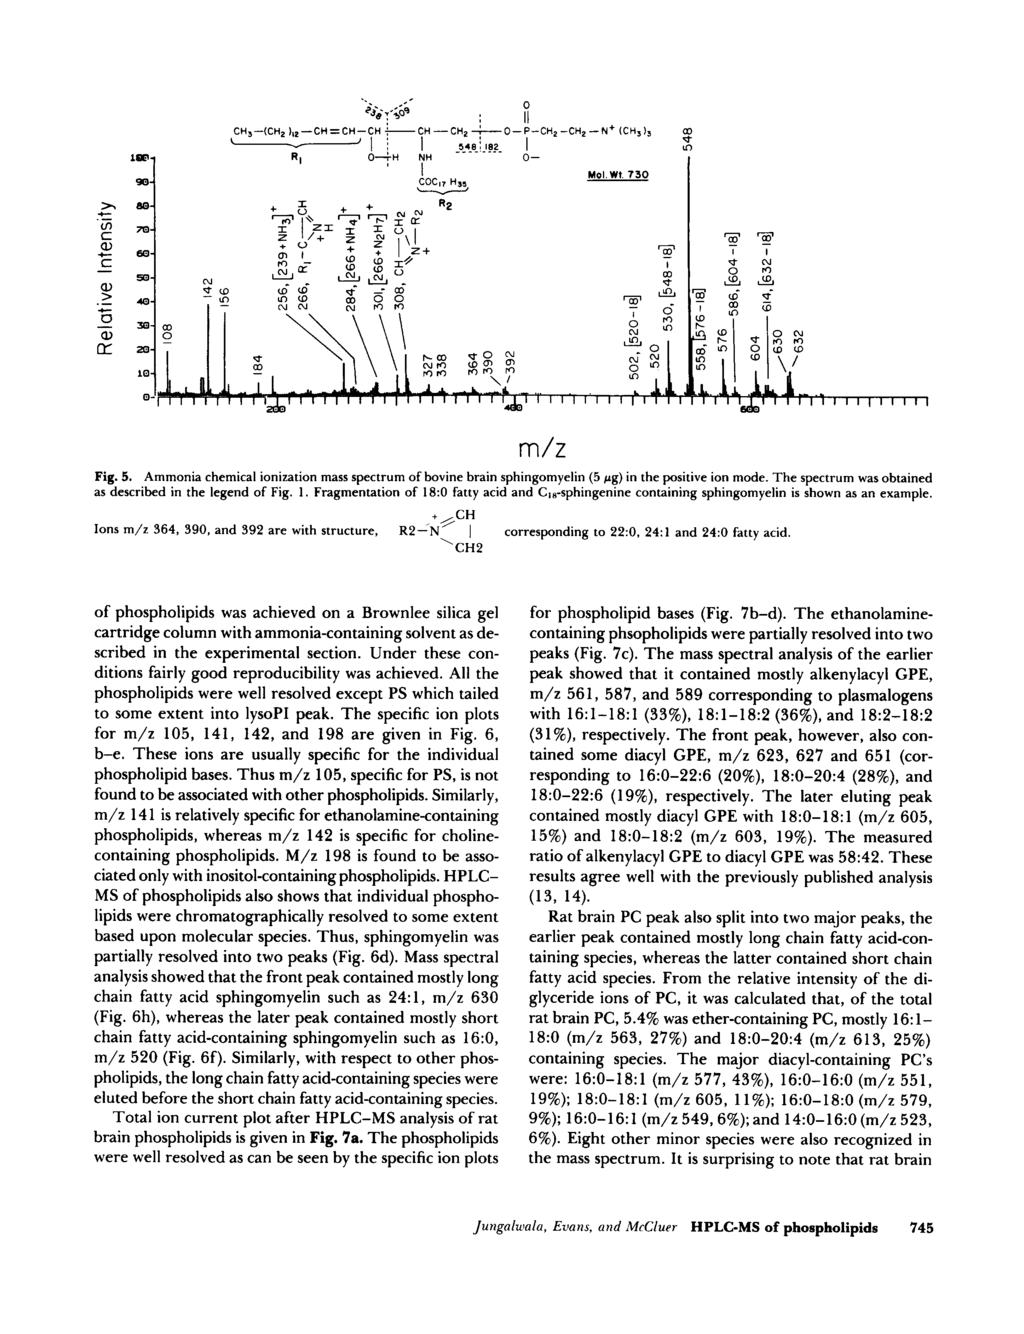 + p 0- I m/z Fig. 5. Ammonia chemical ionization mass spectrum of bovine brain sphingomyelin (5 pg) in the positive ion mode. The spectrum was obtained as described in the legend of Fig. 1.